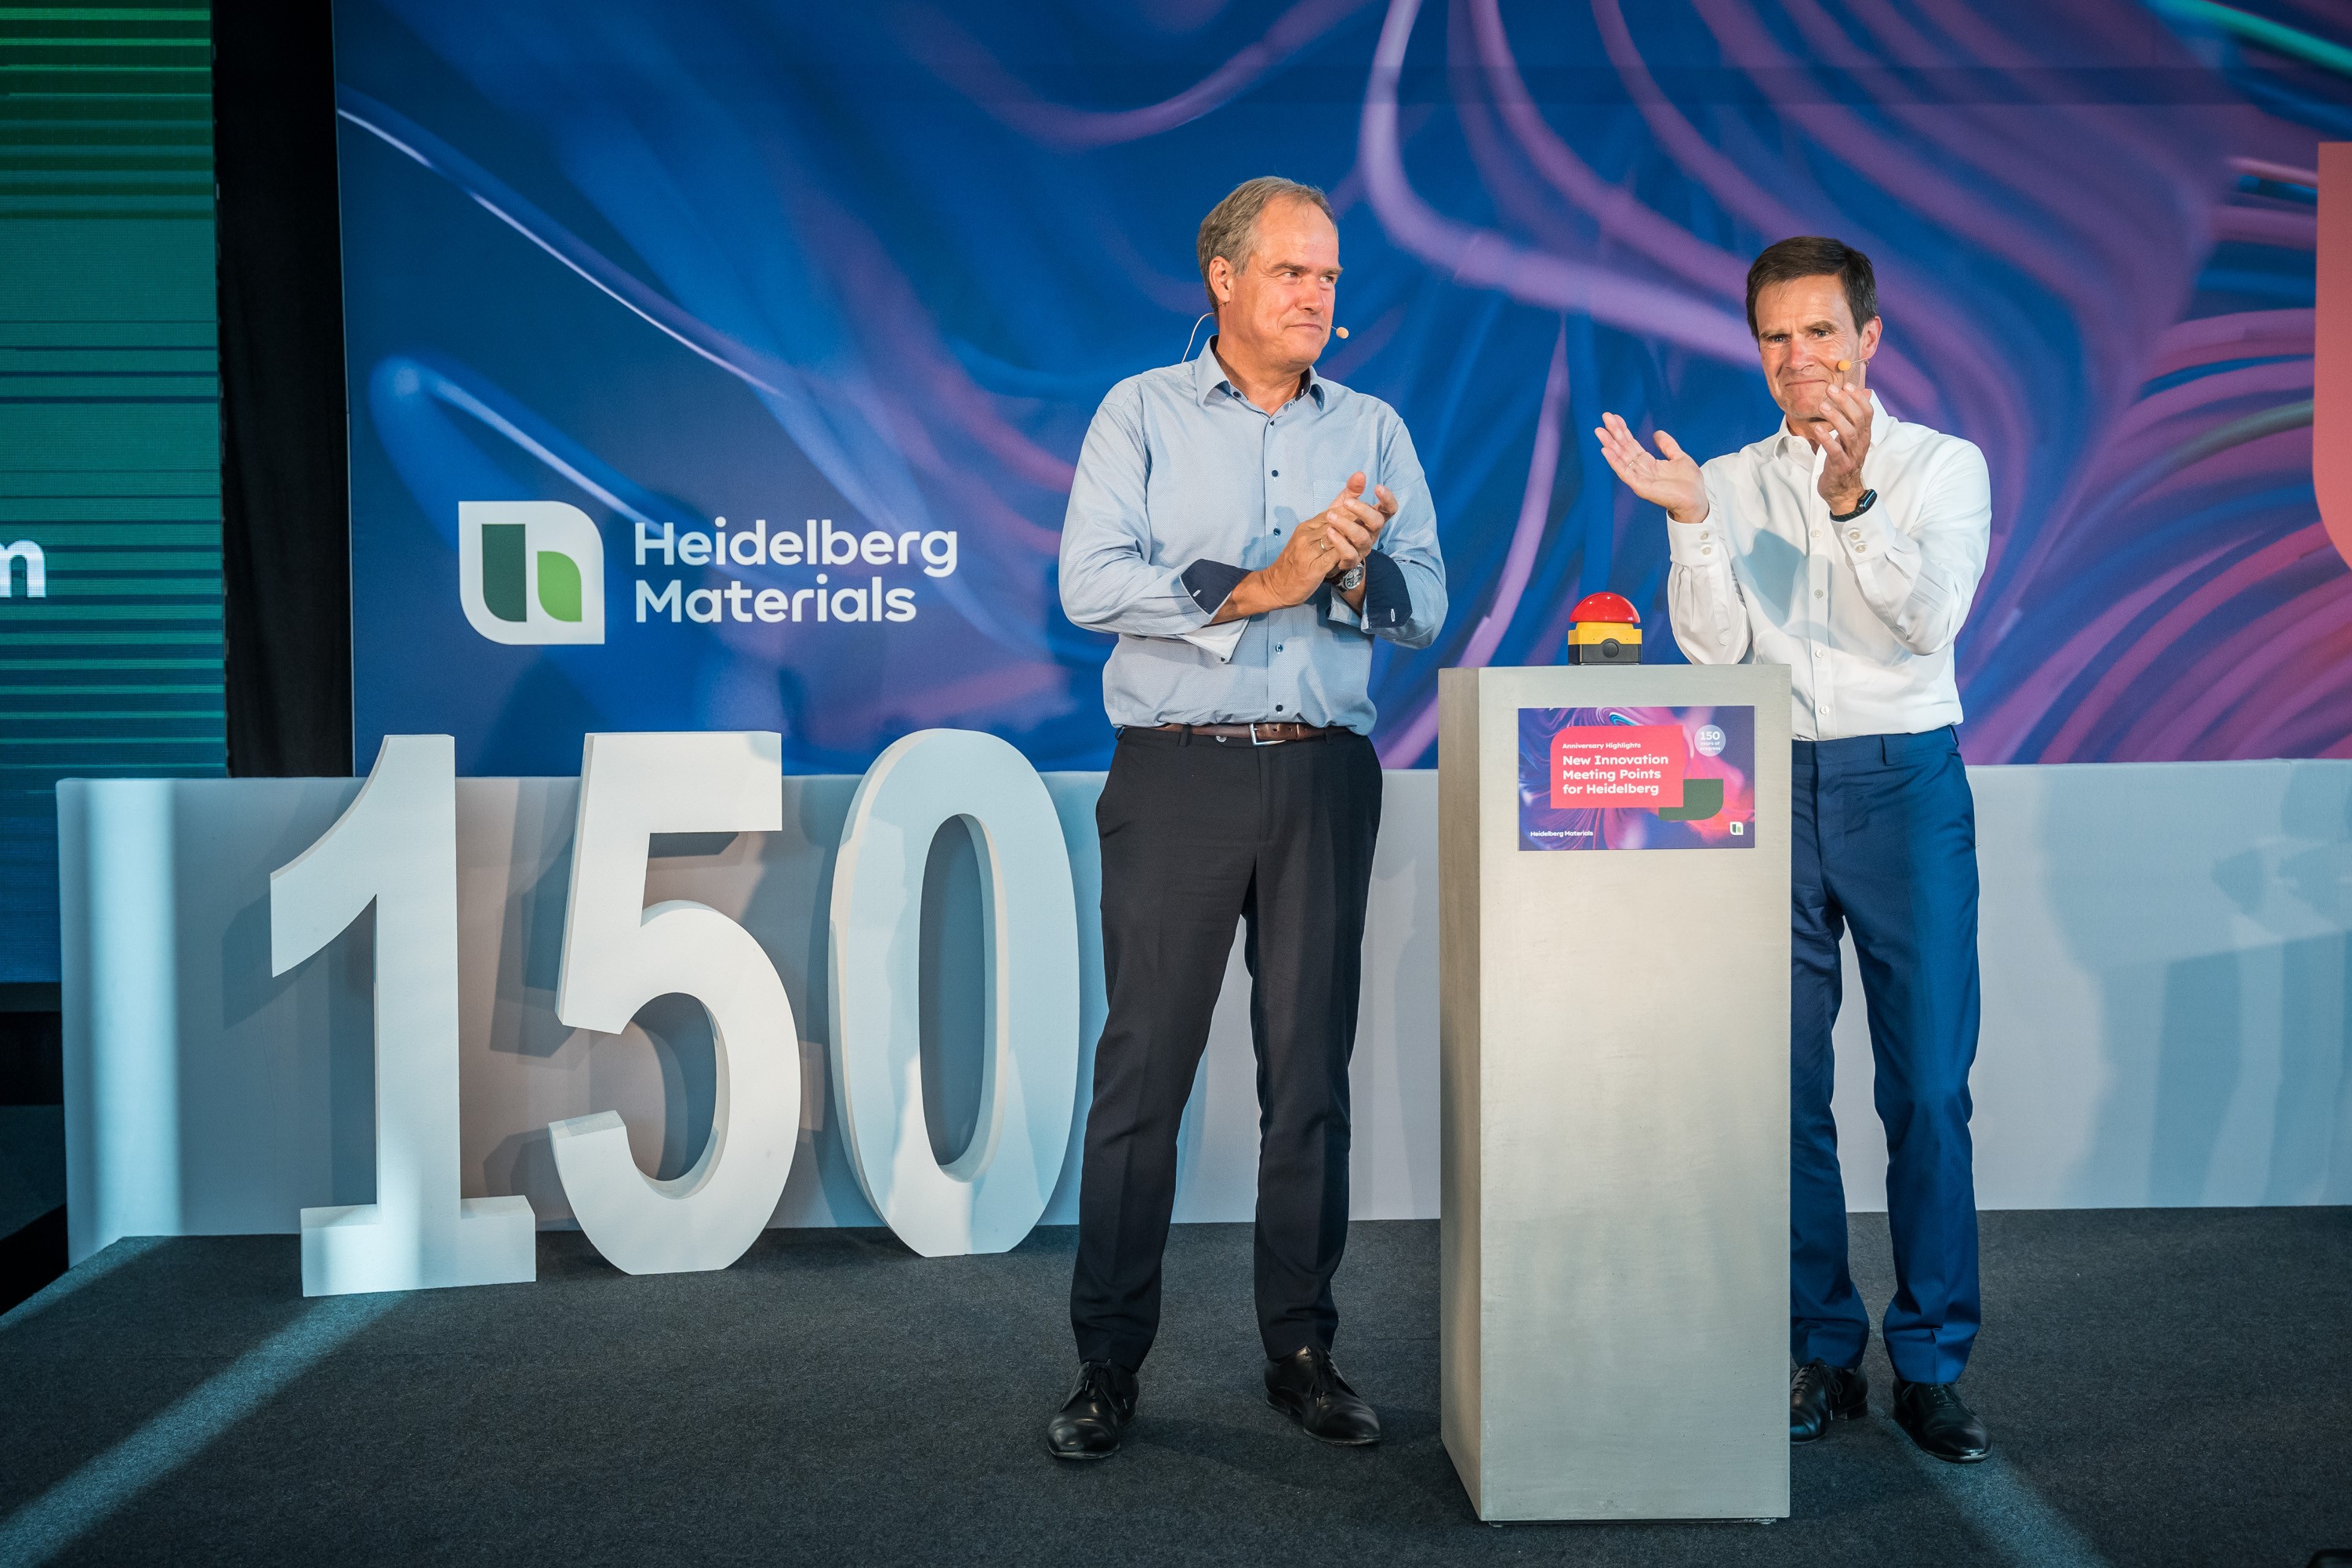 Dr Dominik von Achten, CEO of Heidelberg Materials, and Prof Dr Eckart Würzner, Mayor of the City of Heidelberg, standing on a stage in front of a buzzer, in the background you can read the number 150